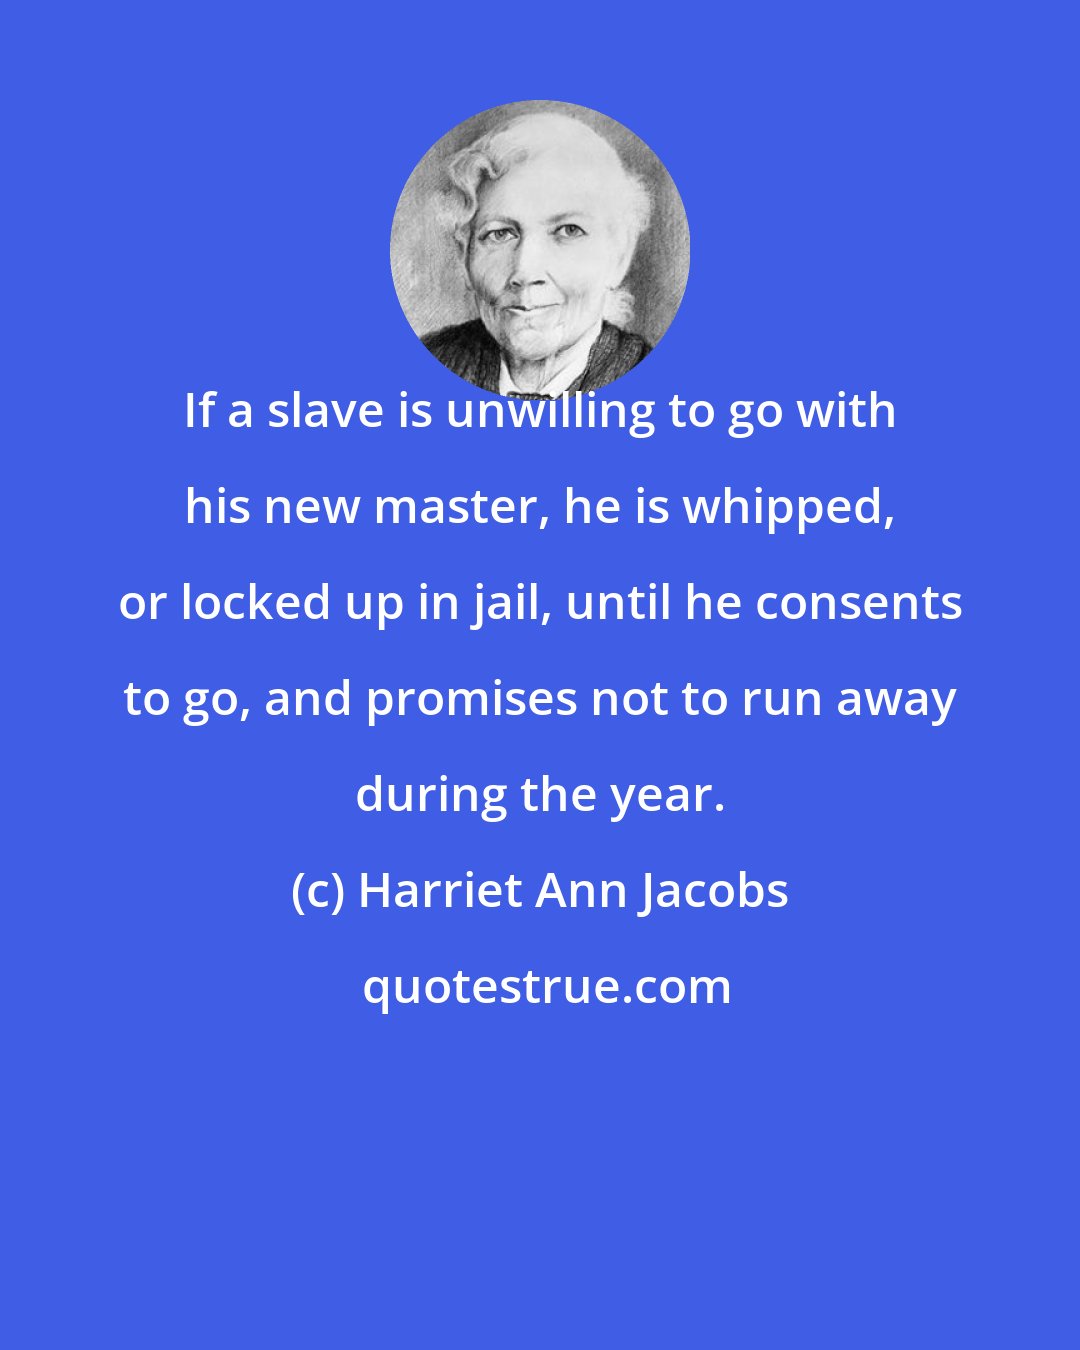 Harriet Ann Jacobs: If a slave is unwilling to go with his new master, he is whipped, or locked up in jail, until he consents to go, and promises not to run away during the year.